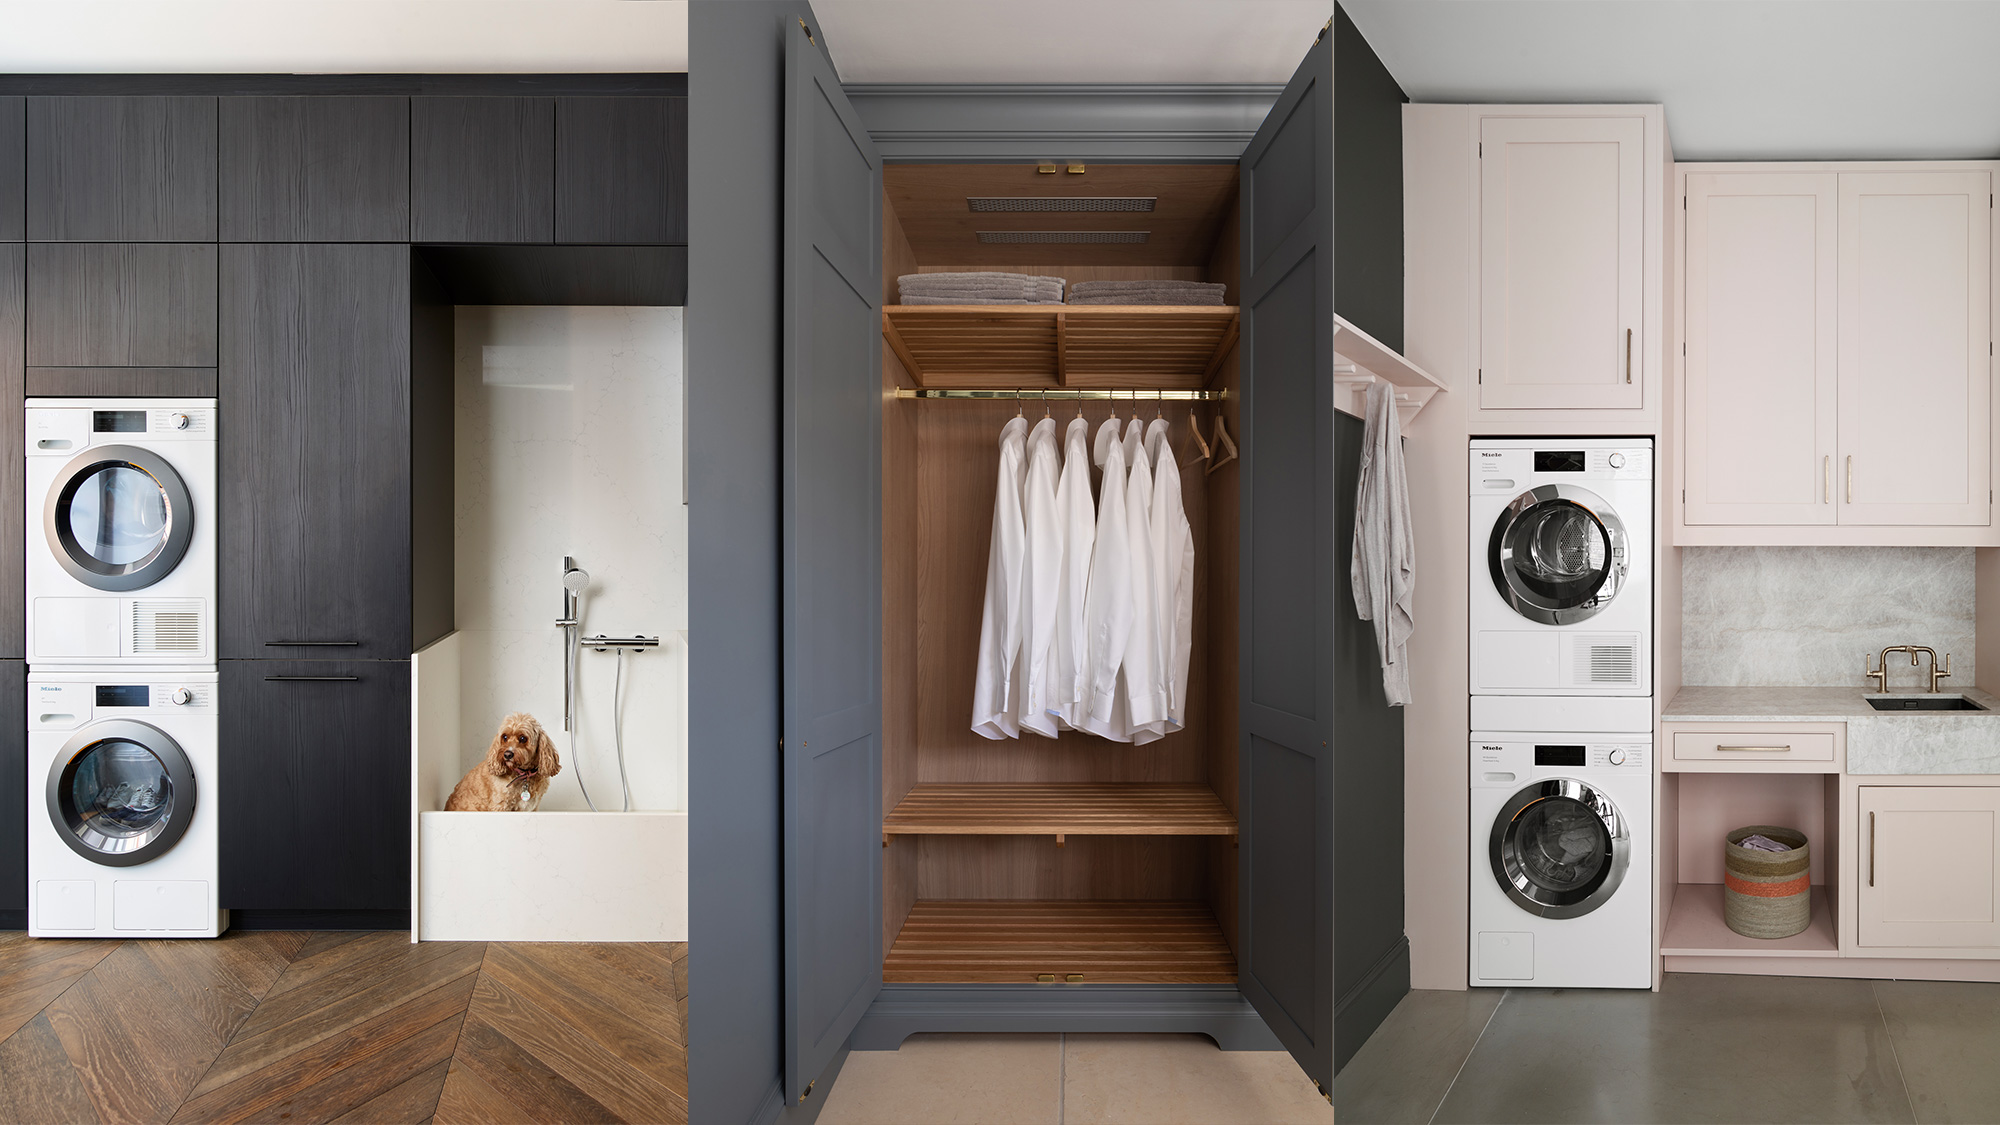 Modern Utility Room Ideas: 10 Ways To A Sleek, Efficient And Organized Space  |